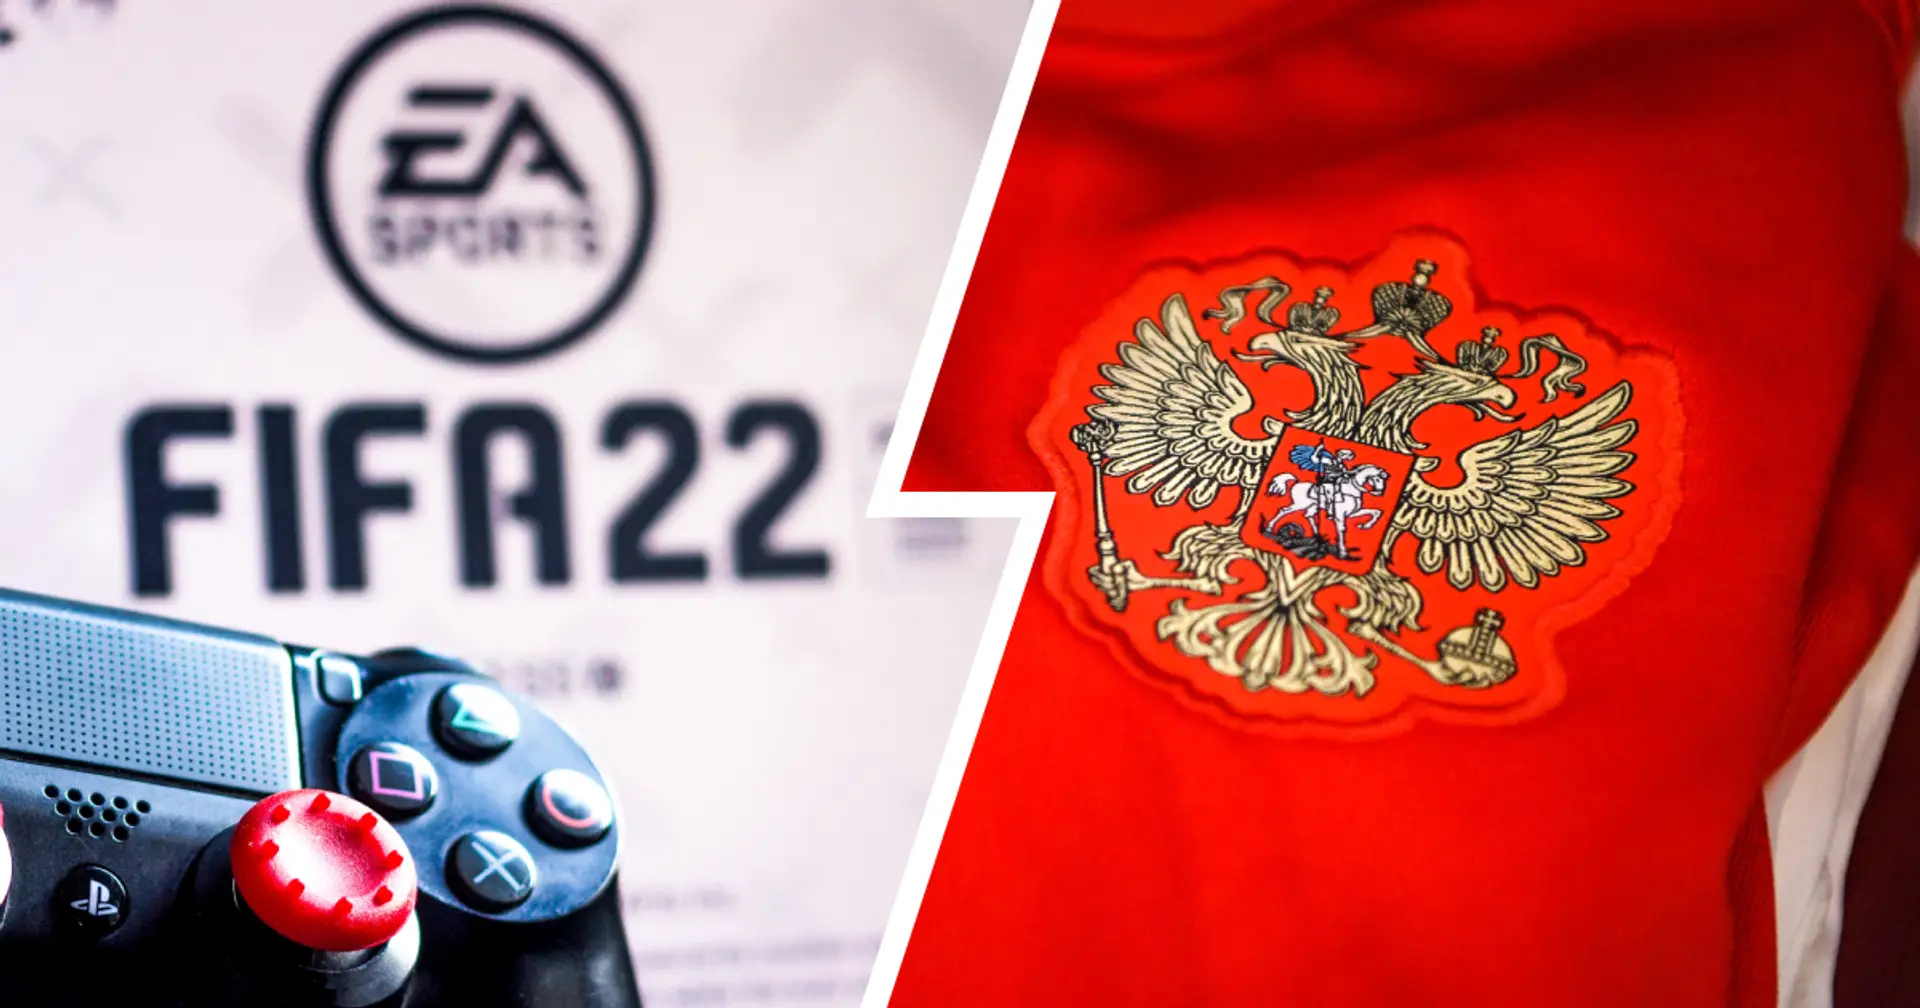 BREAKING: Russia and Russian clubs removed from FIFA 22 by EA Sports